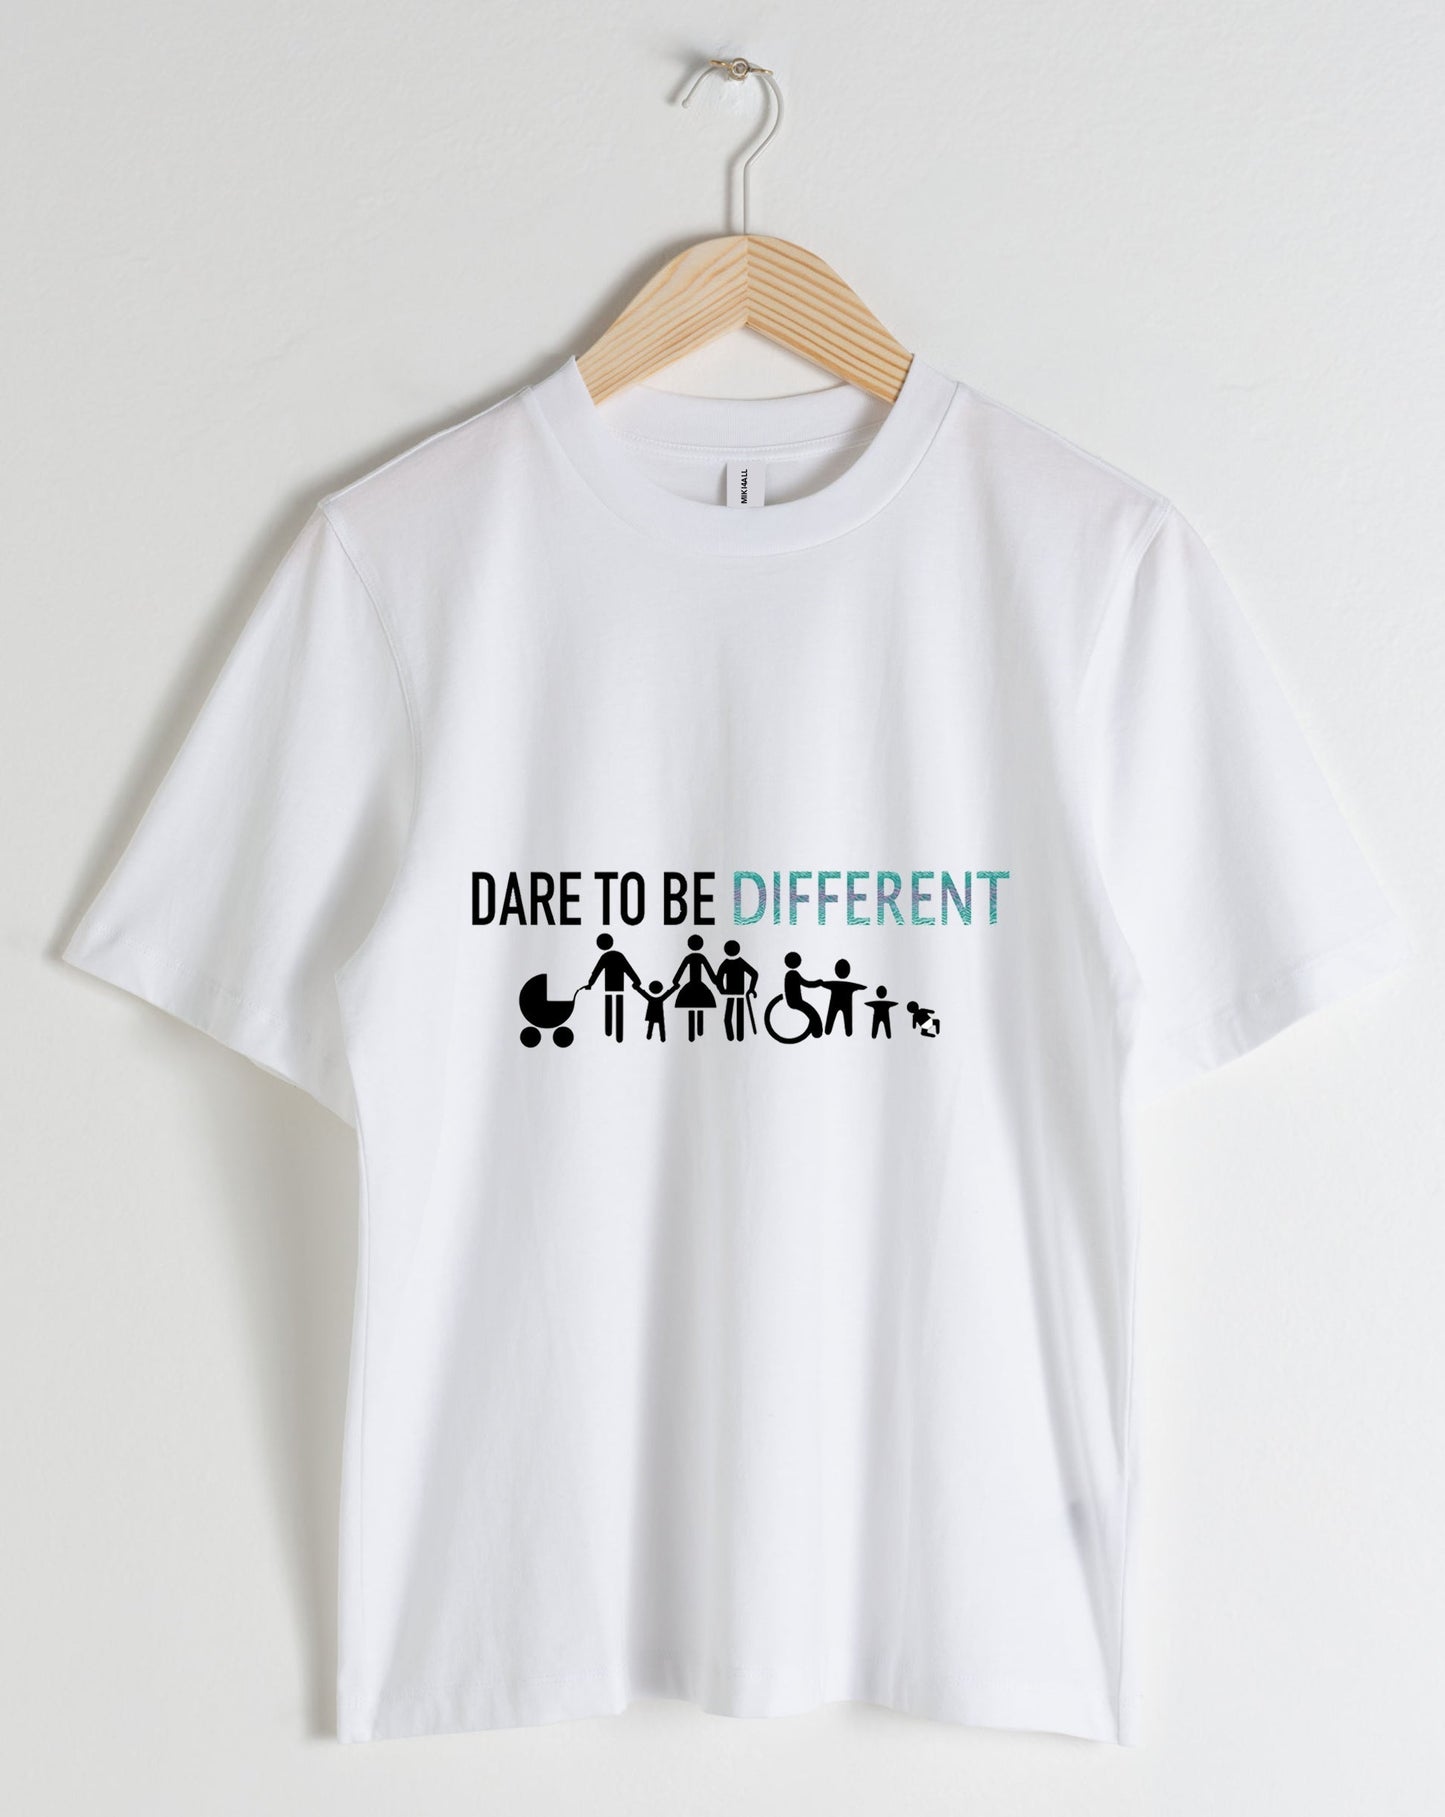 DAMES t-shirt "Dare to be different"